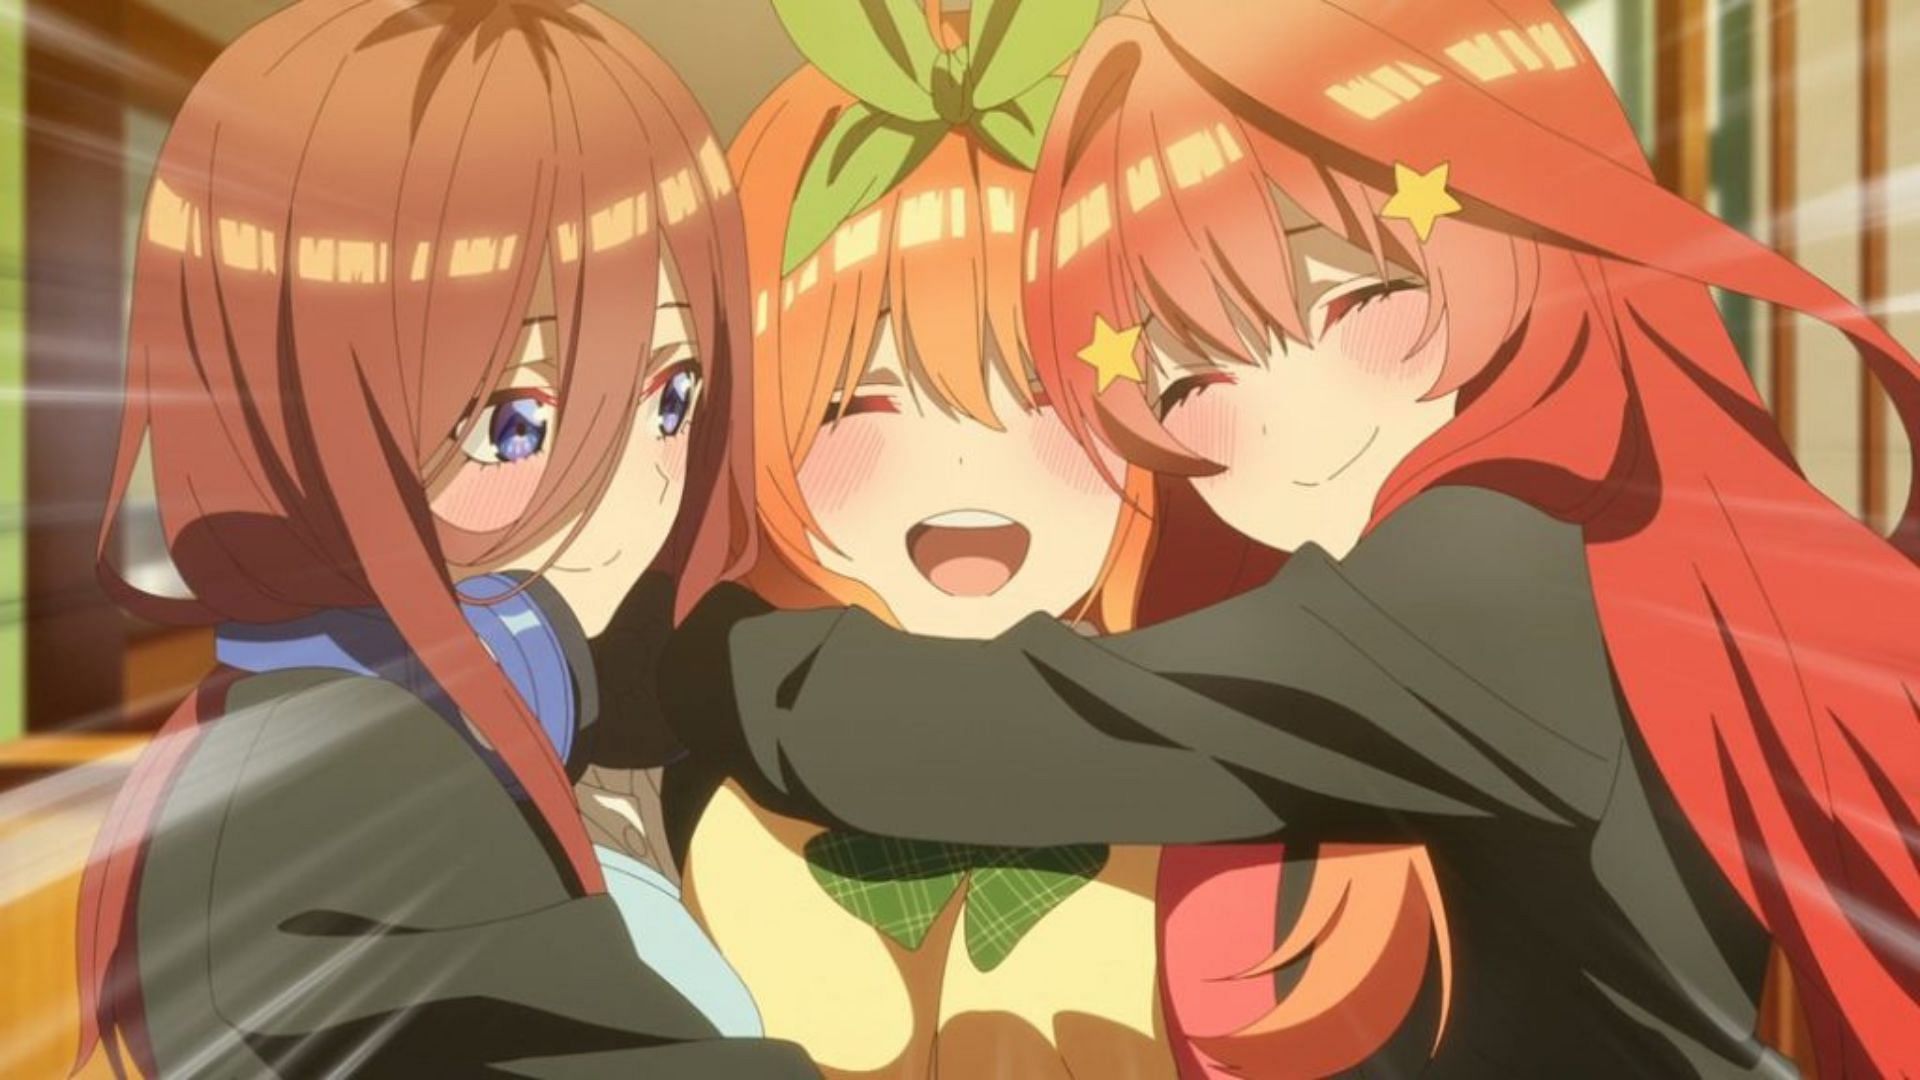 The Quintessential Quintuplets Movie will be screened in North